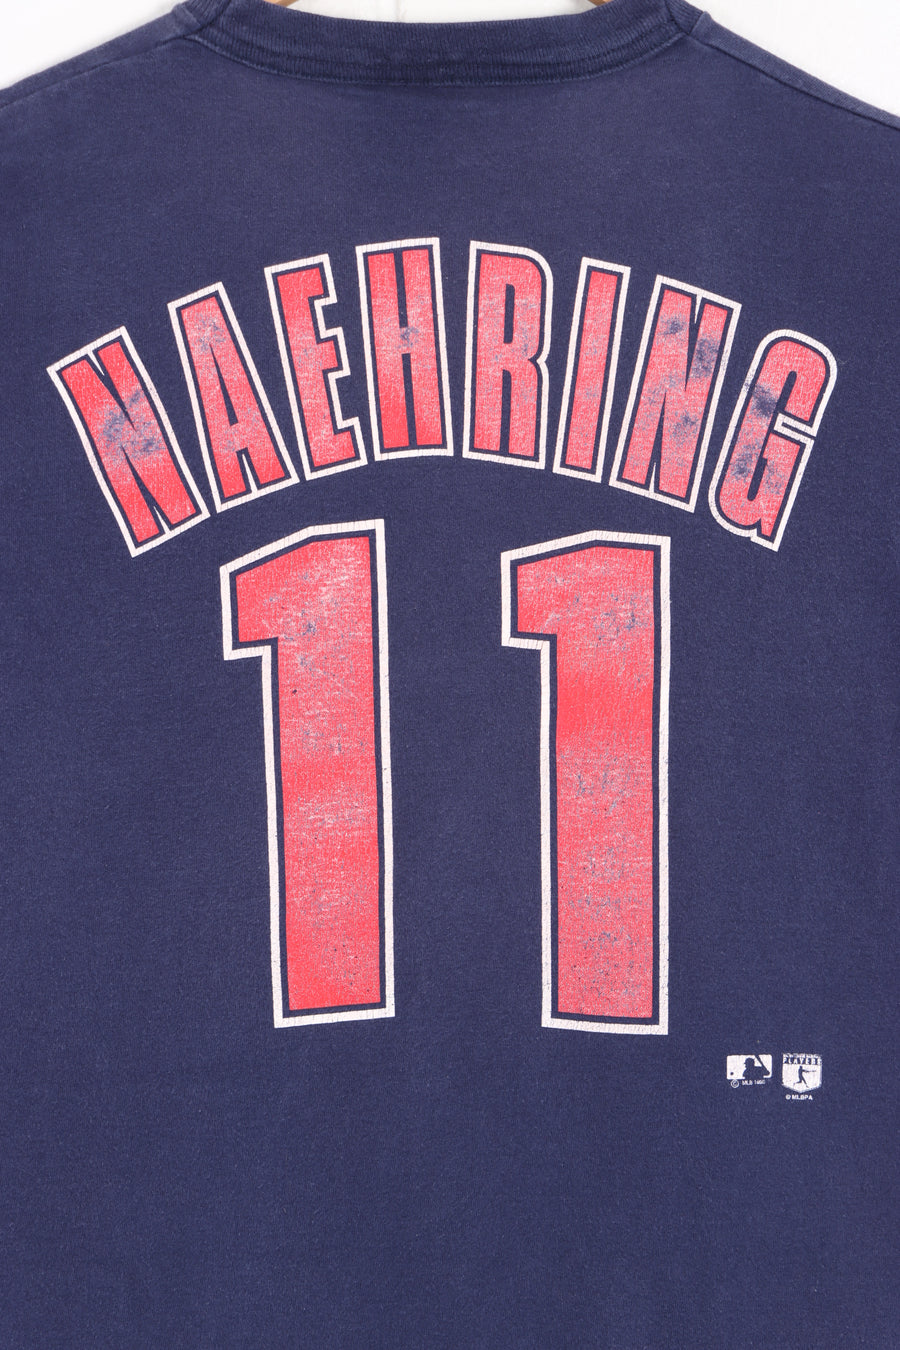 MLB 1995 Boston Red Sox #11 Naehring Front Back Single Stitch T-Shirt (S) - Vintage Sole Melbourne